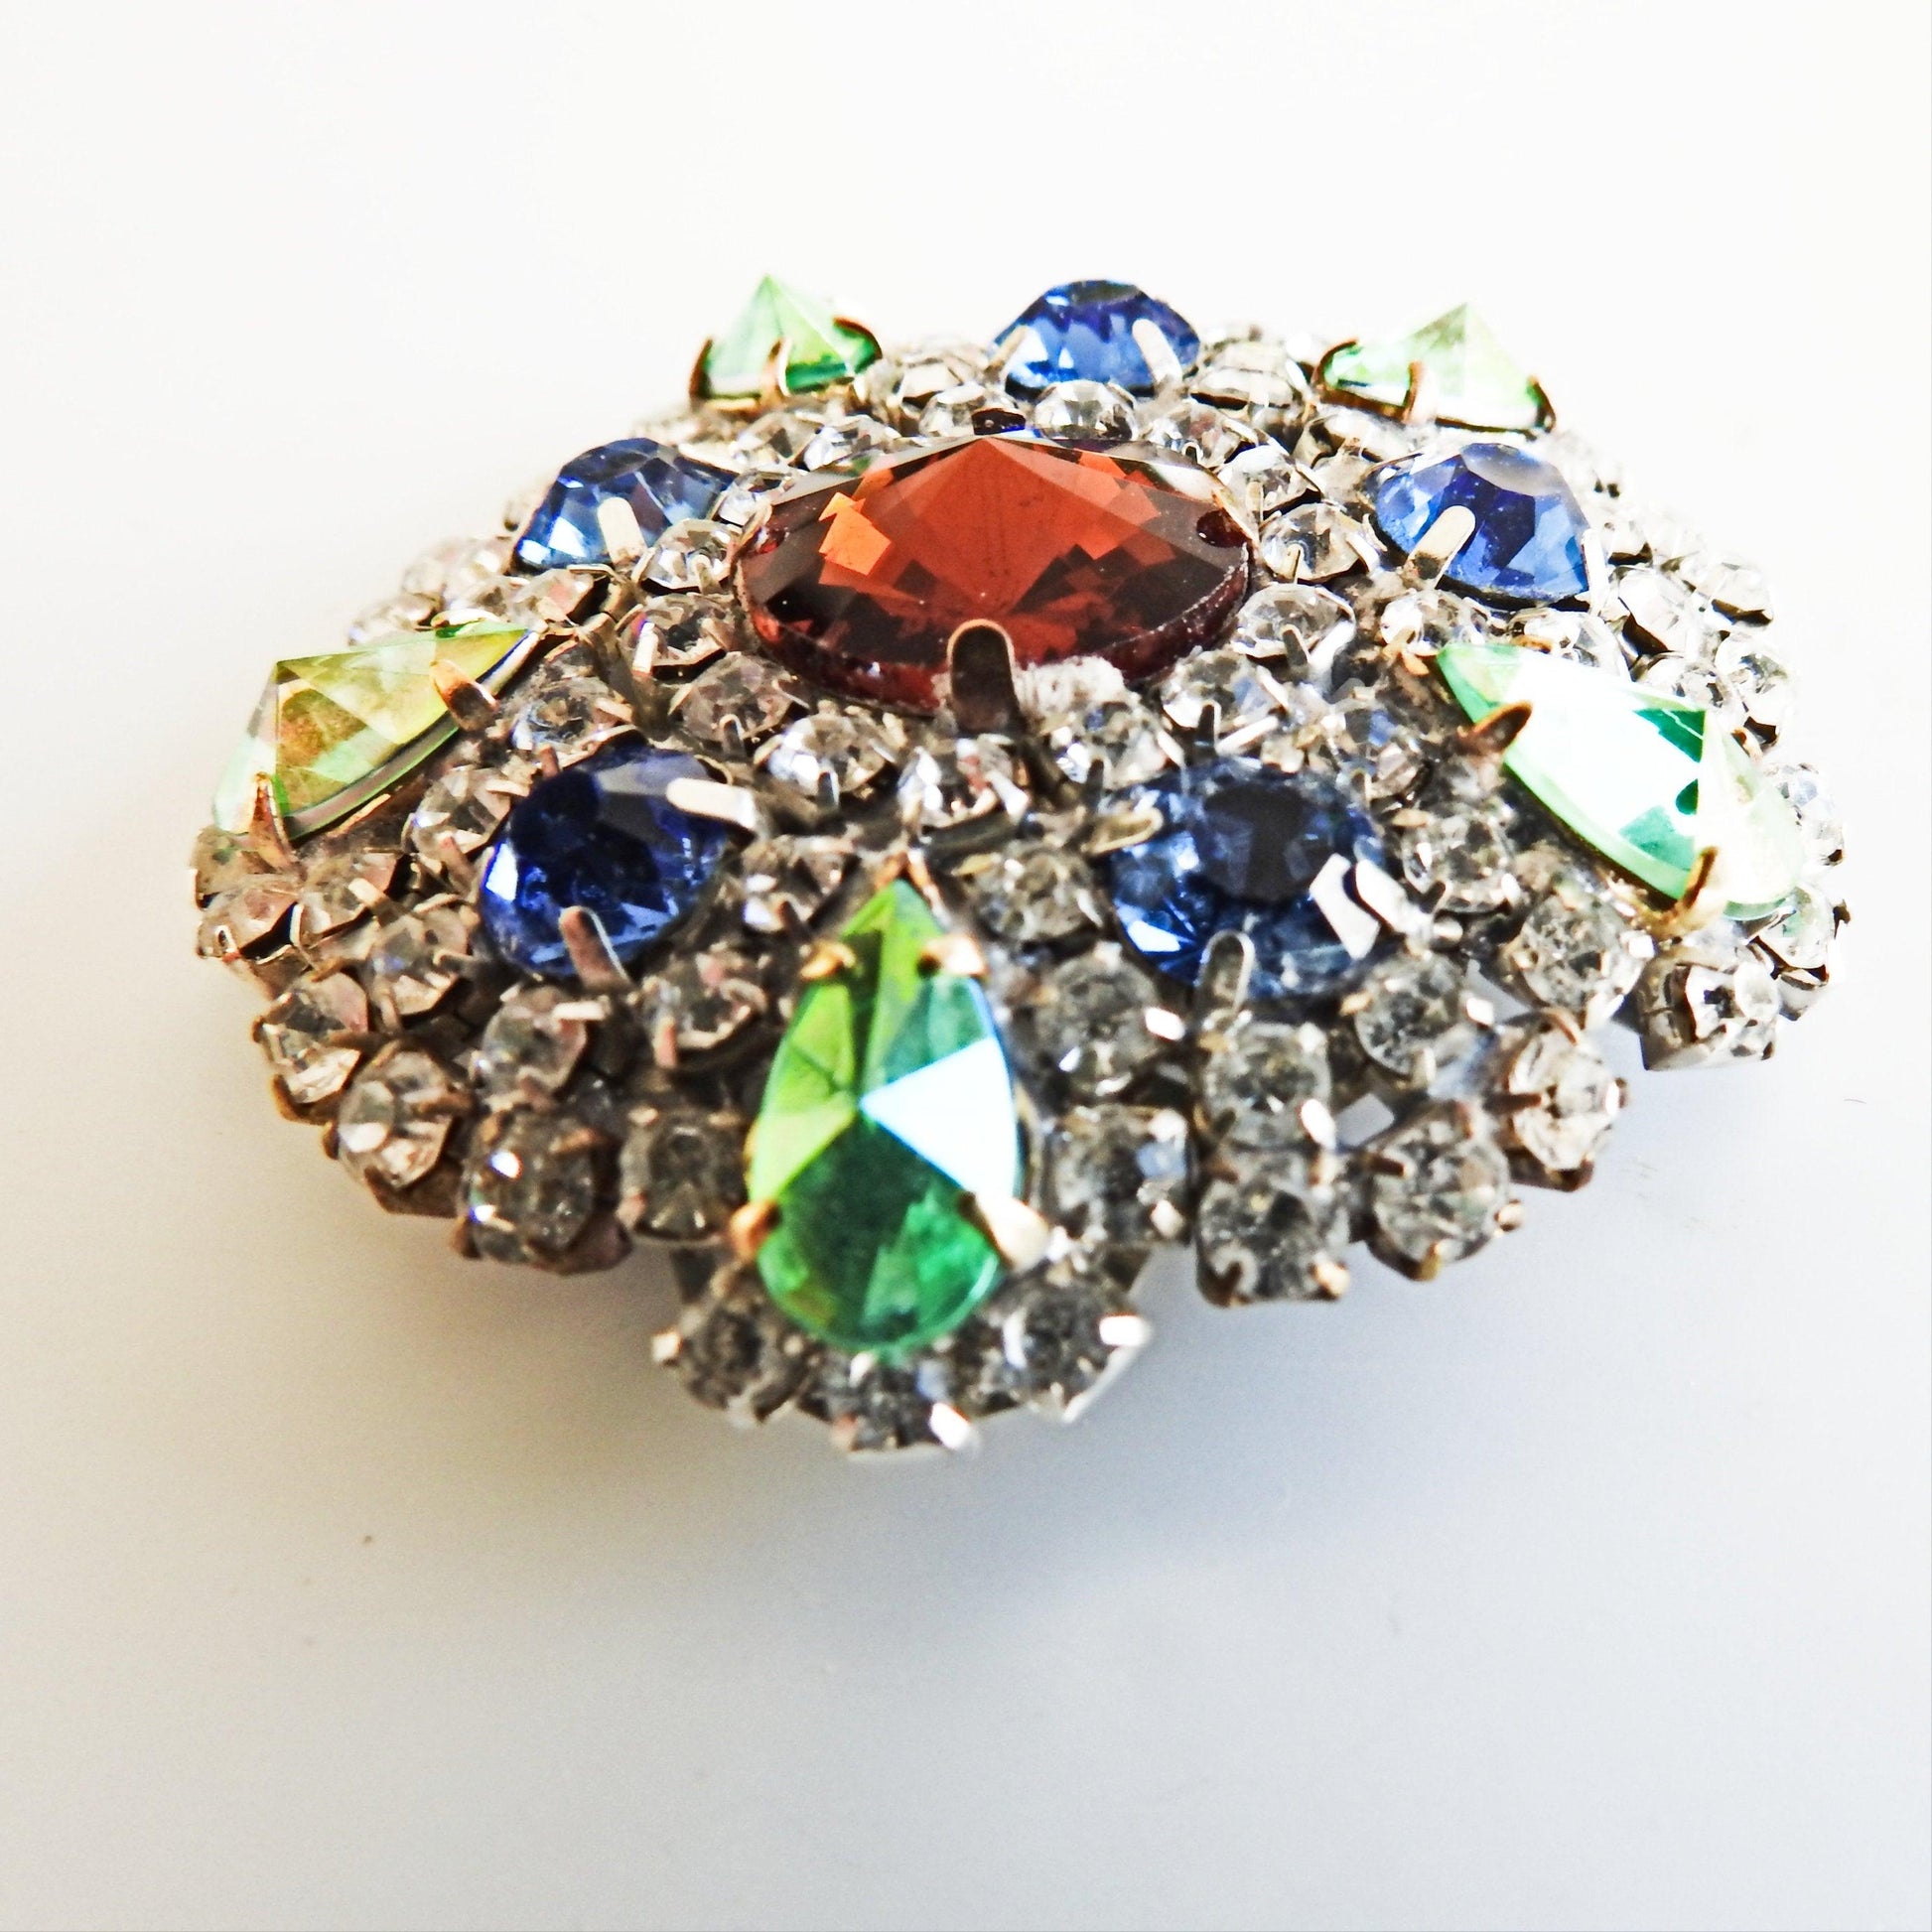 Czech glass brooch vintage, multicolored rhinestone brooch, grandmother costume jewelry gifts for her, unique gift for wife, grandma brooch